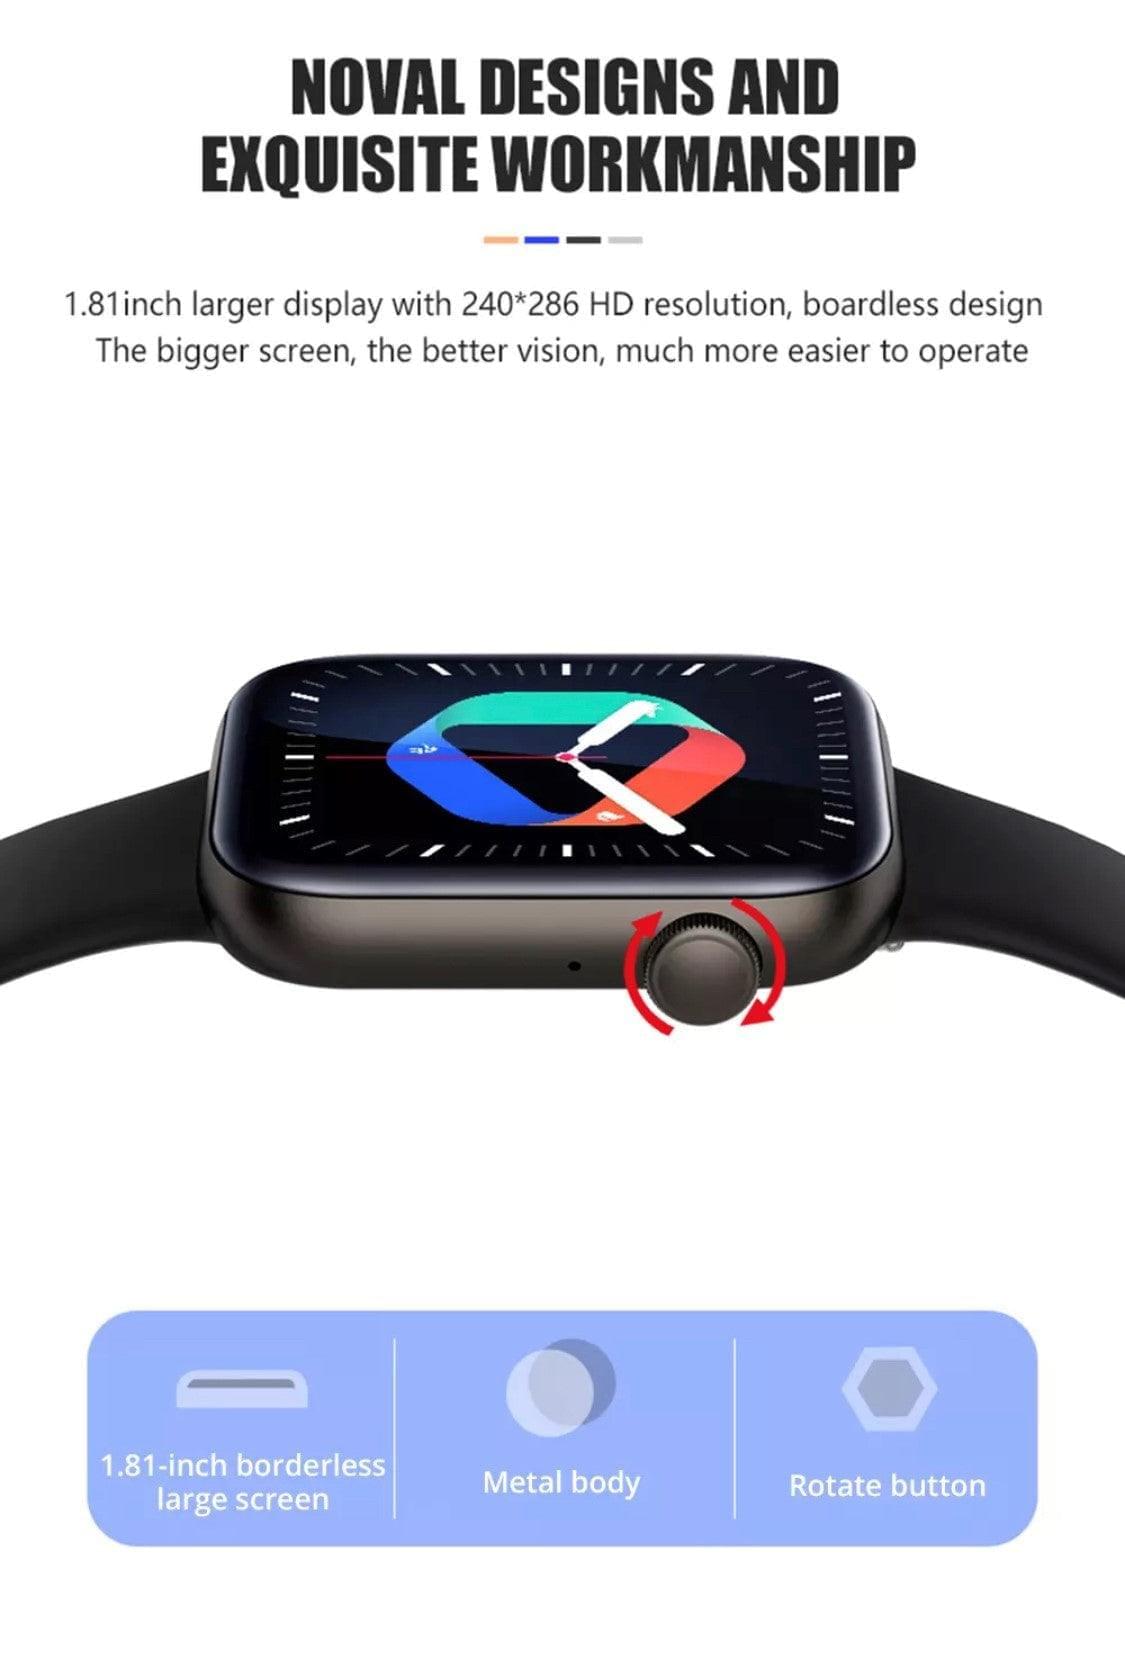 COLMI P45 Blue Smart Watch South Africa